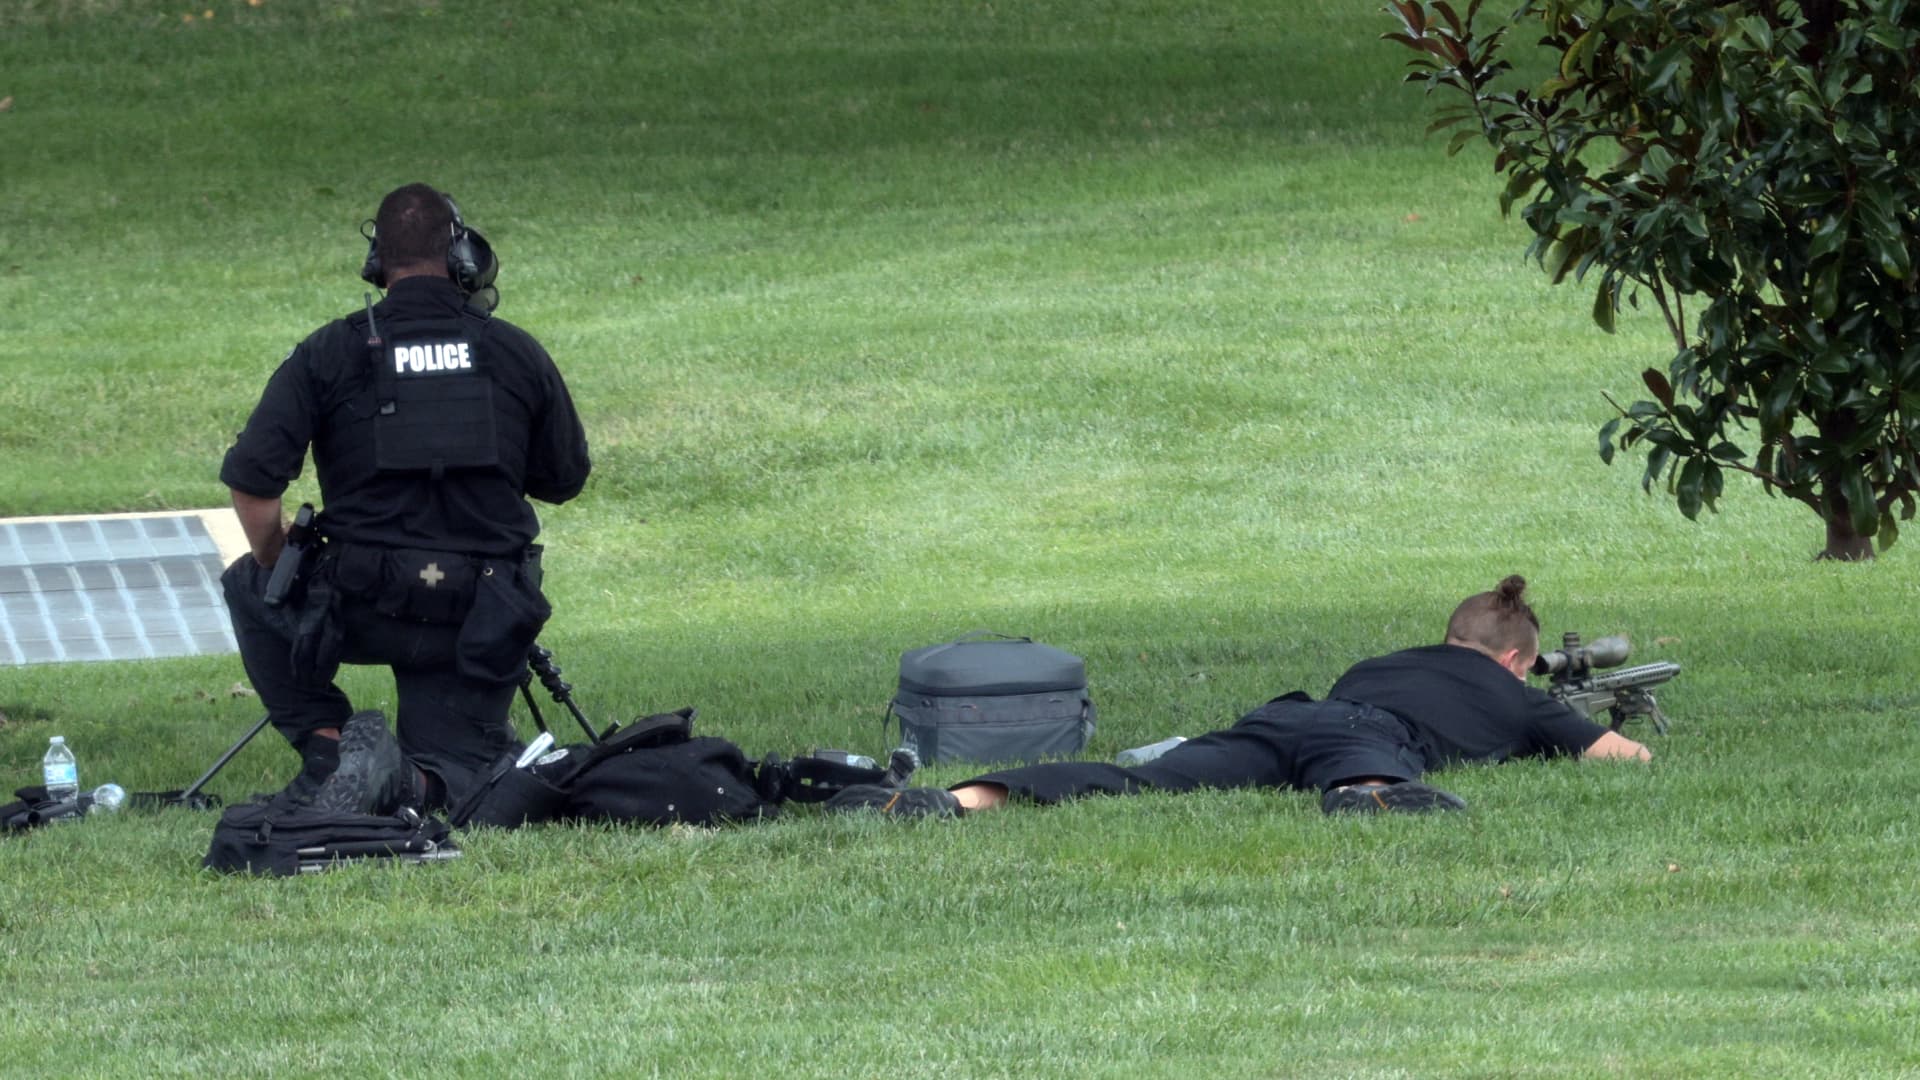 A police sniper team remains in position near the Library of Congress on Capitol Hill August 19, 2021 in Washington, DC.